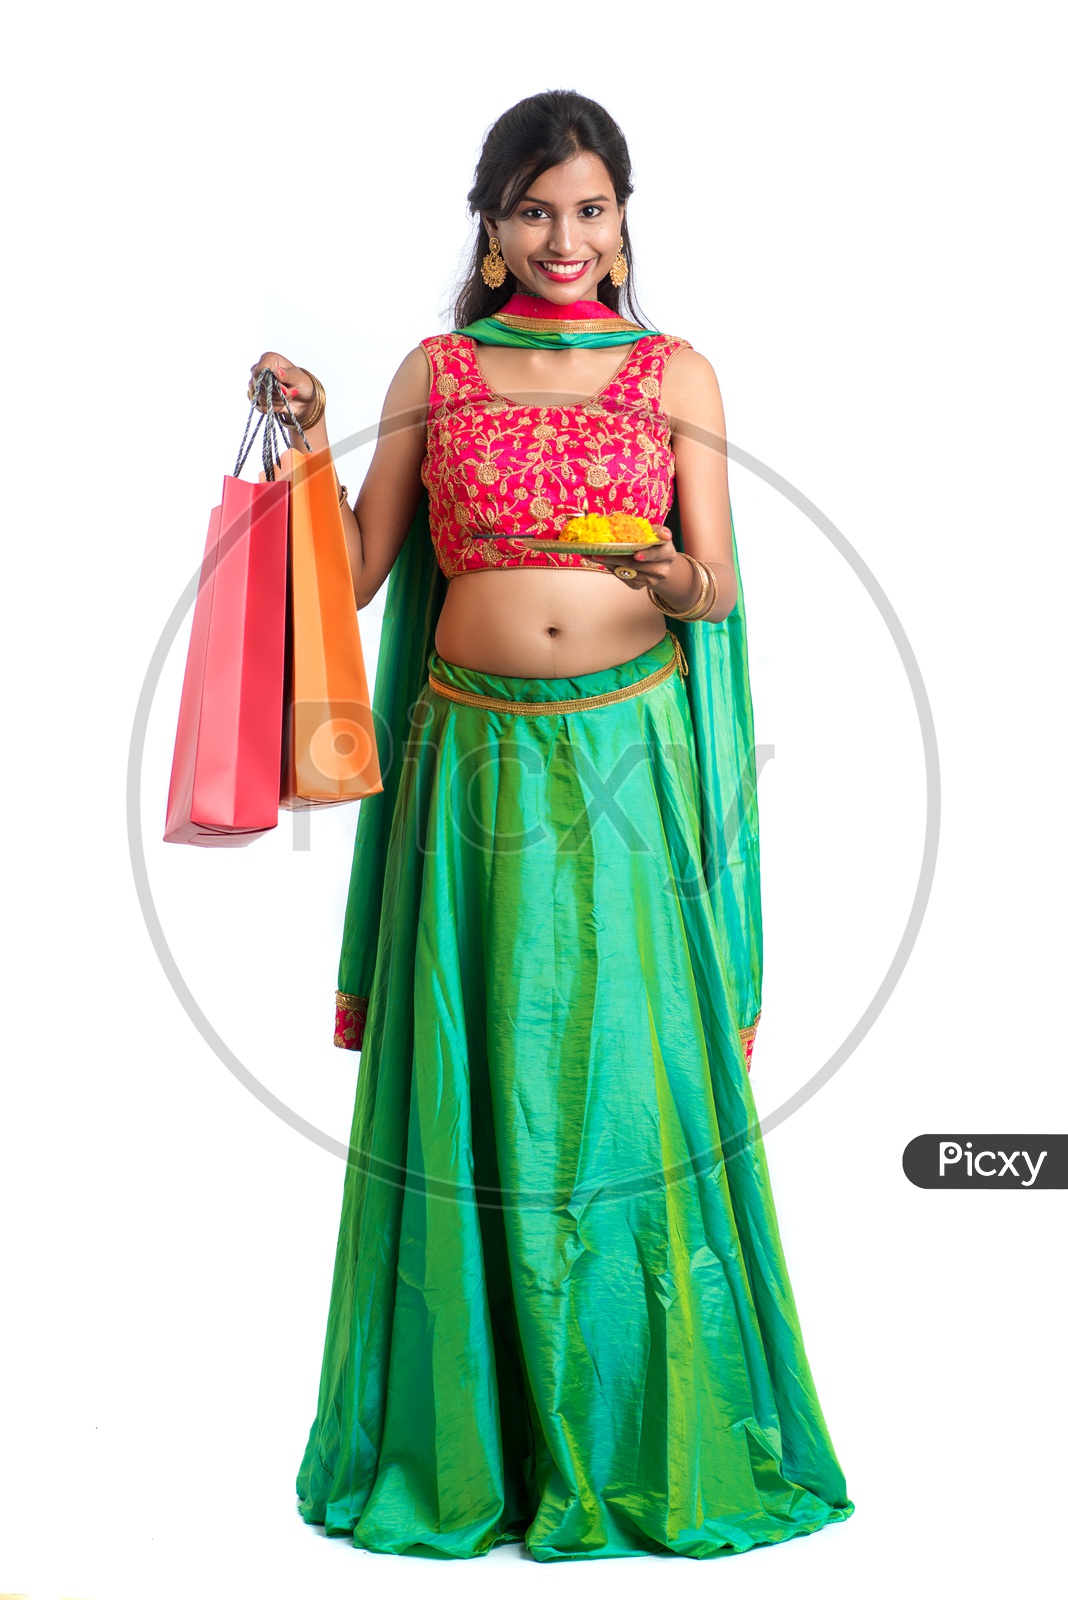 Portrait Of a Young India Traditional Woman  Holding Pooja Plate Or Dia  and Shopping Bags  in Hand  Over a White  Background